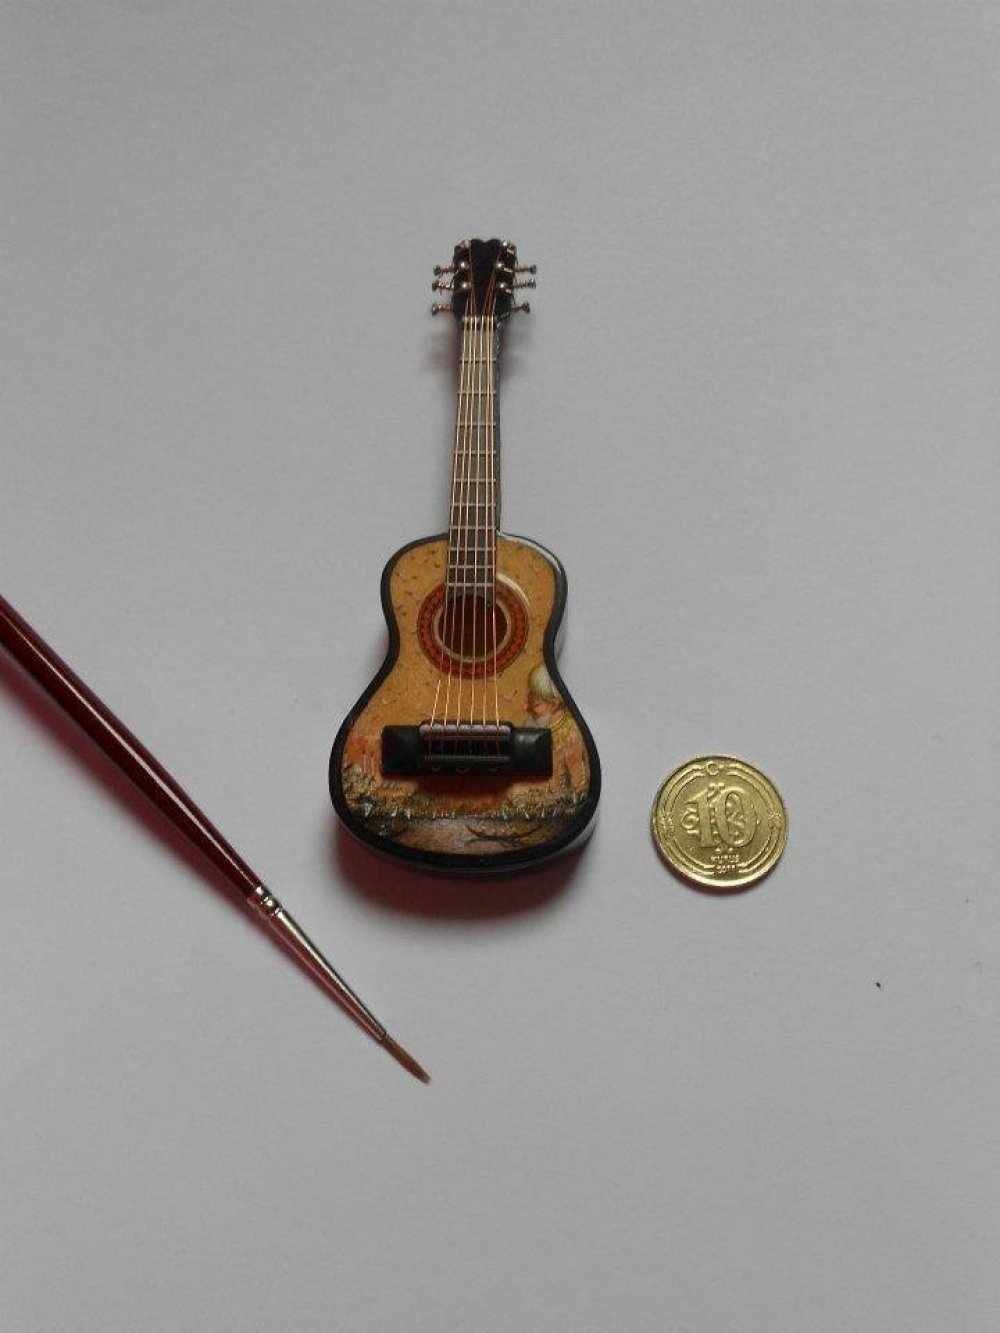 Hasan Kale is the master of introducing a miniature drawing